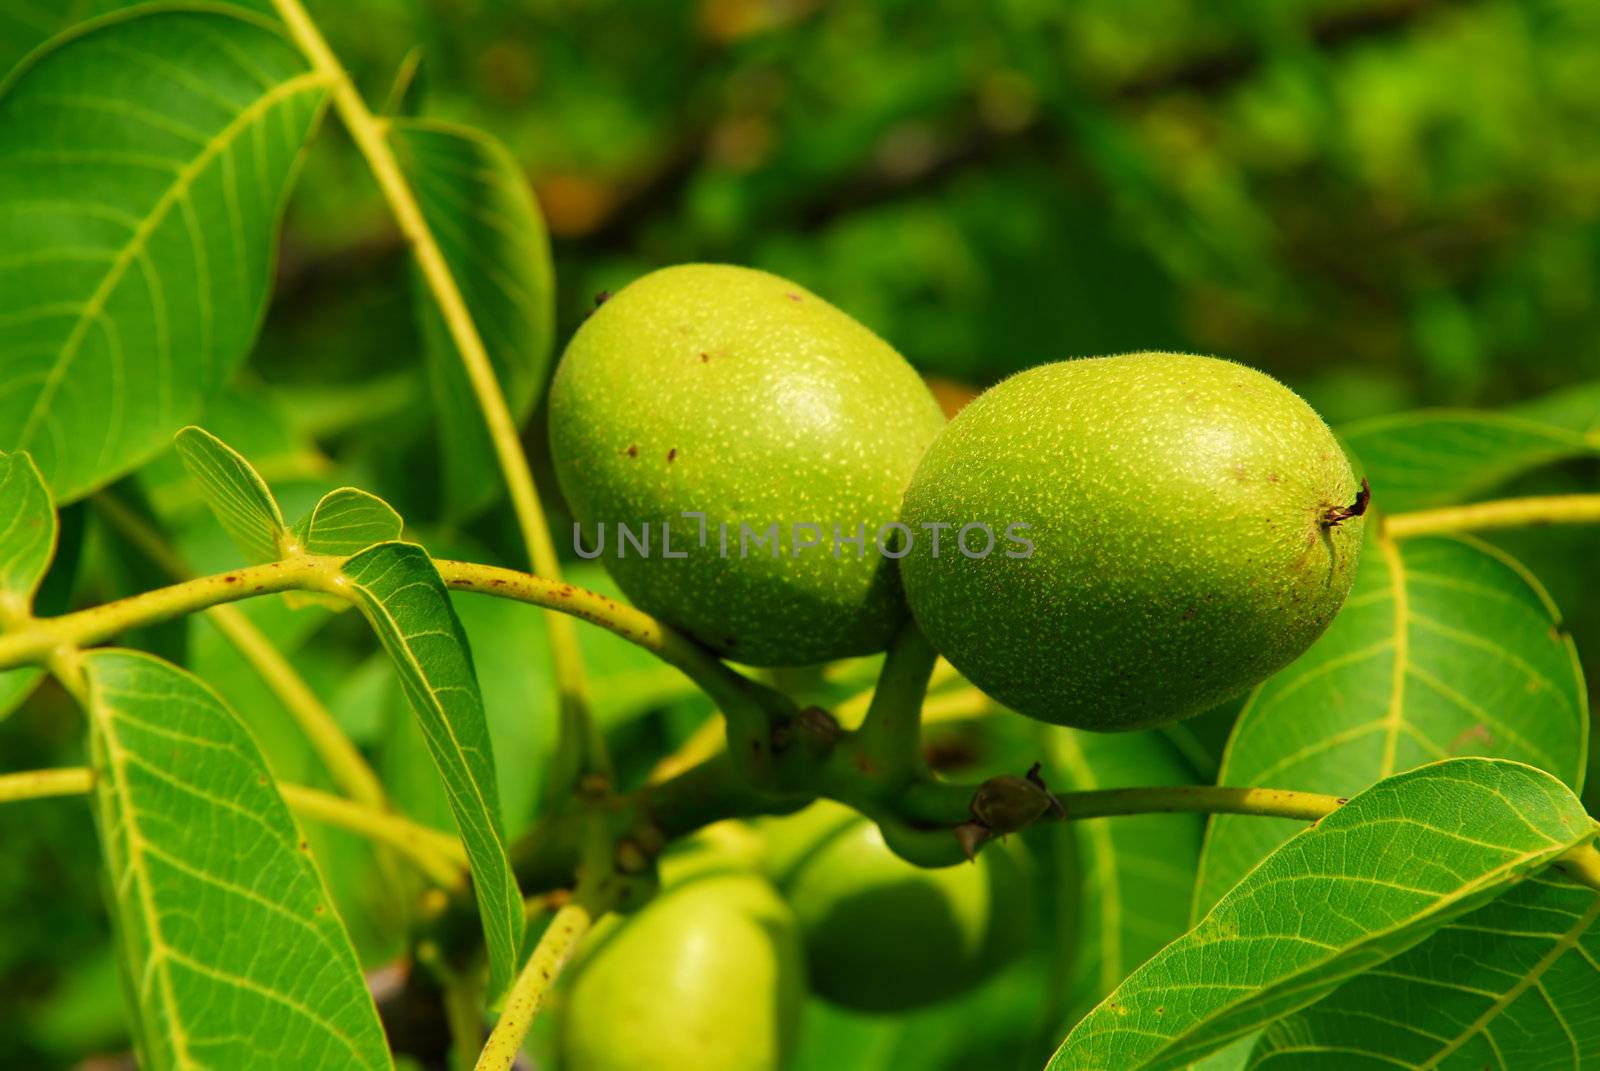 Green walnuts growing on a tree, close up